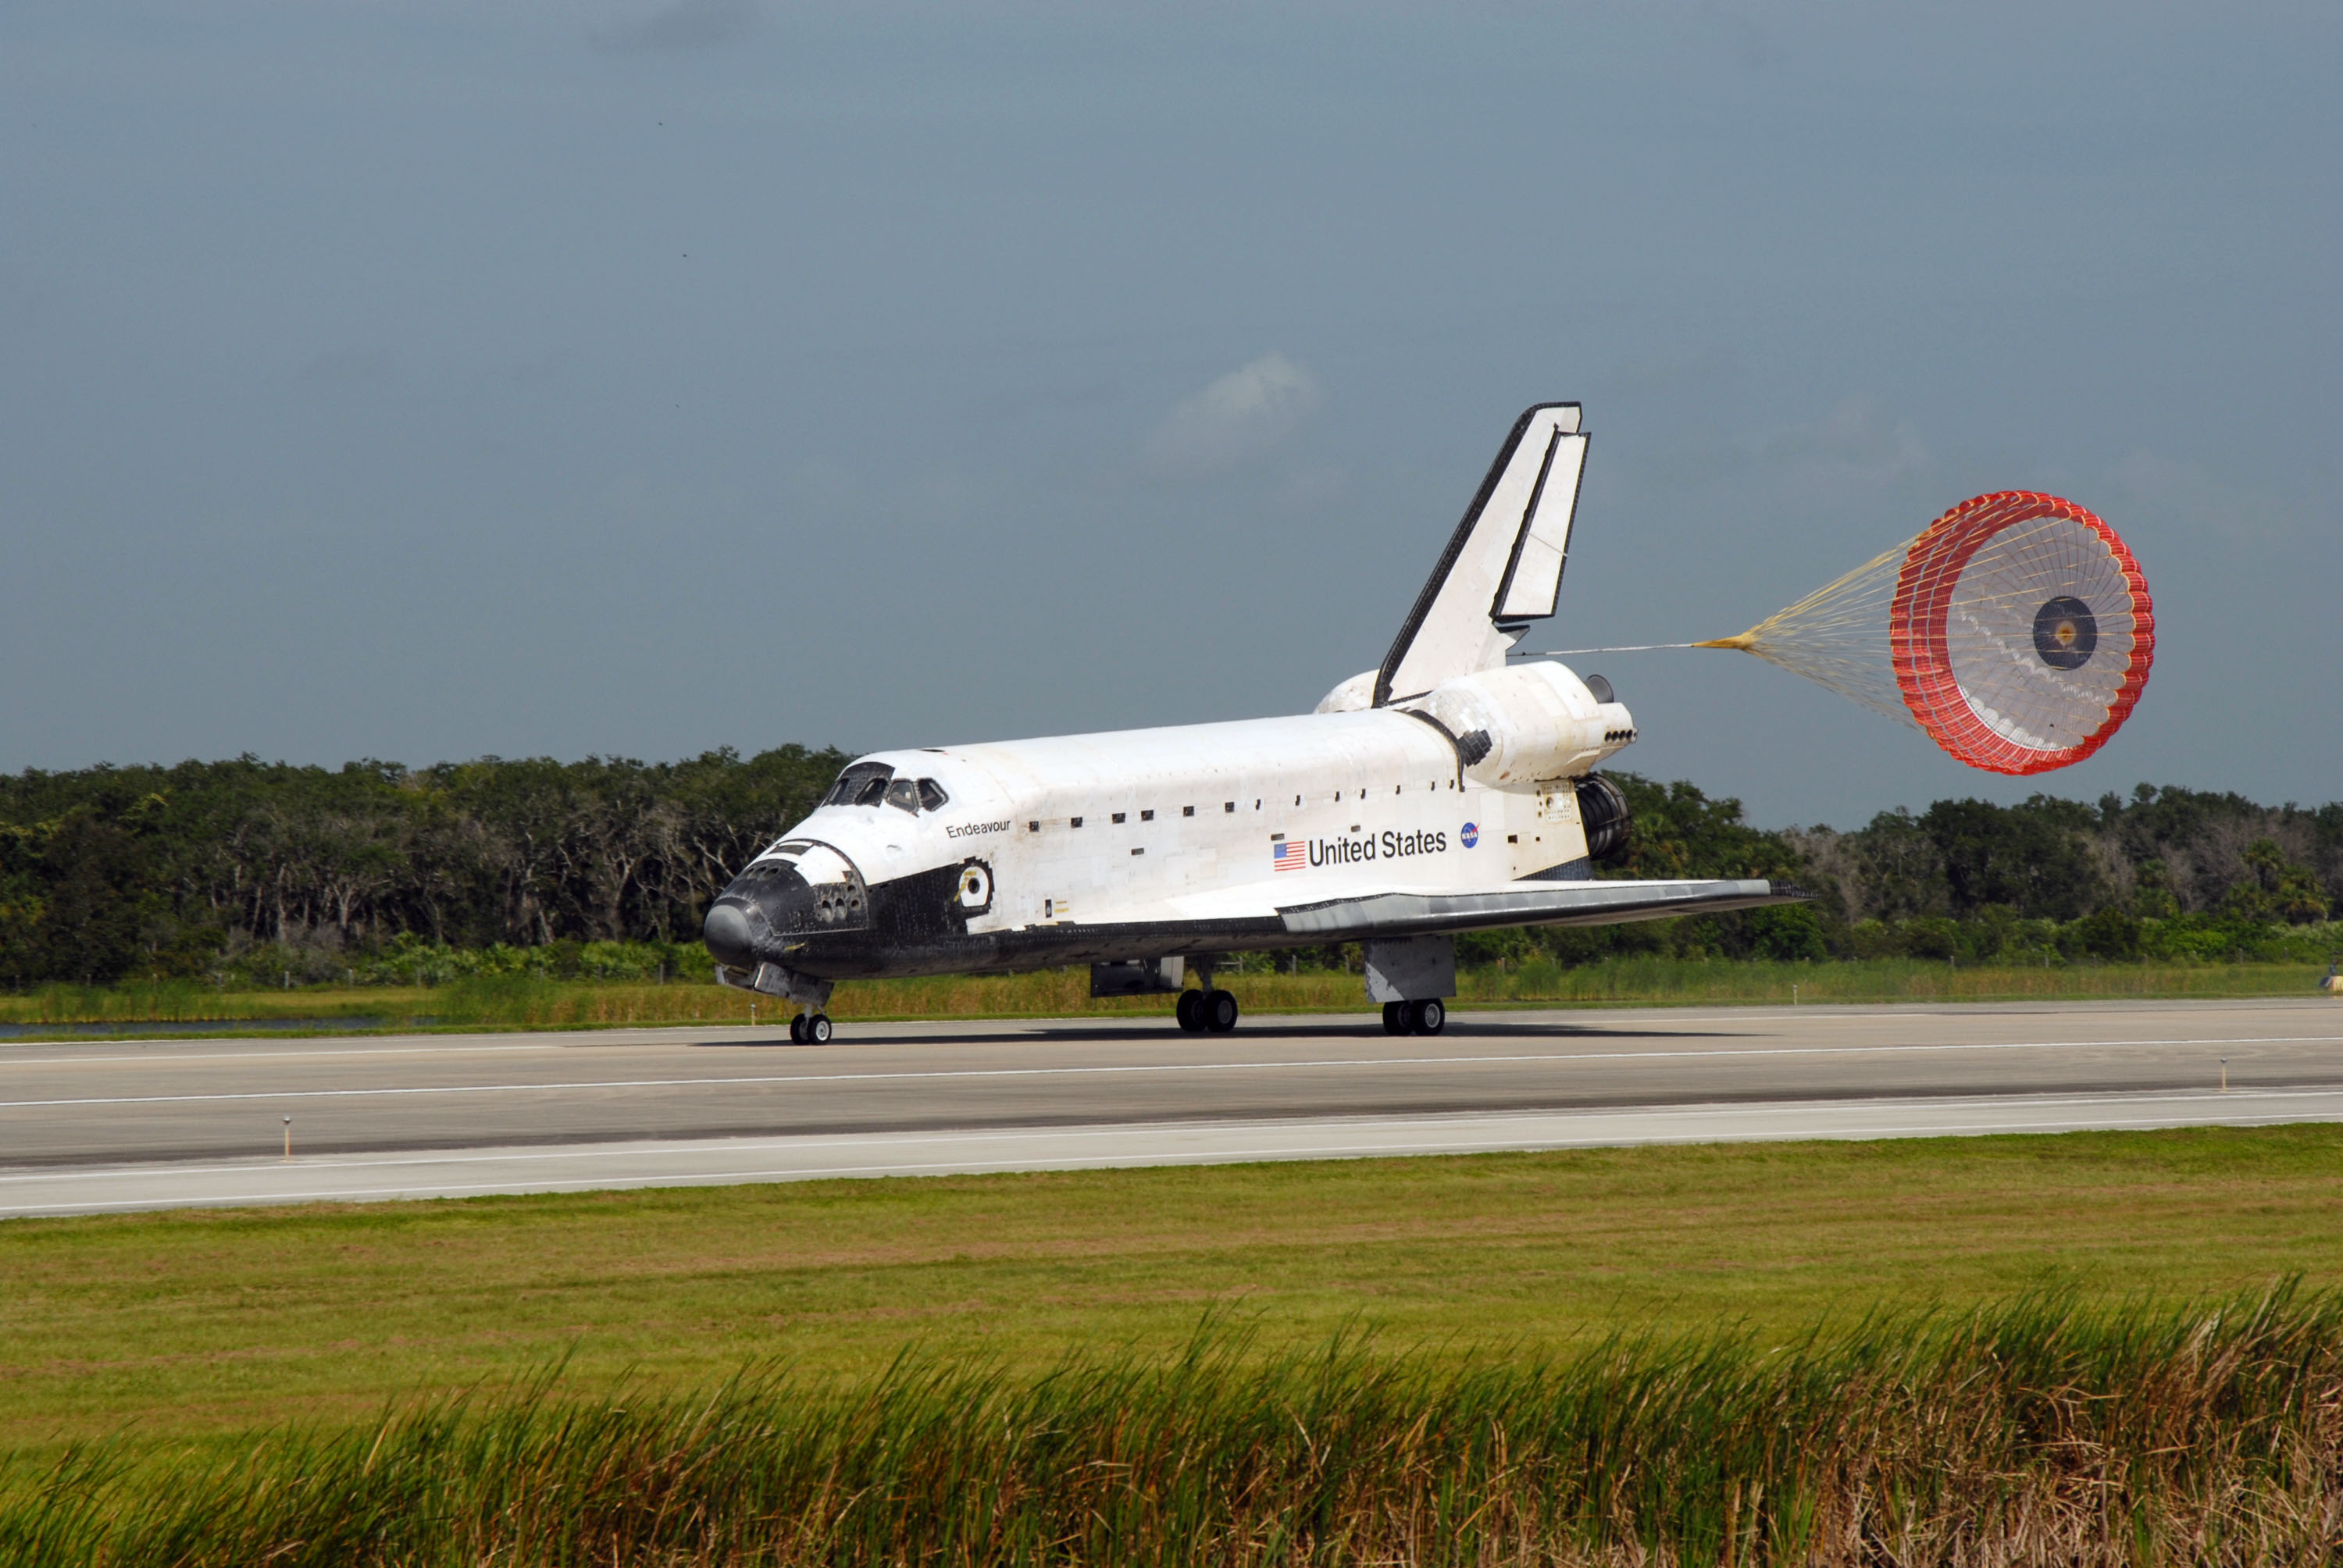 Endeavour touches down on the Shuttle Landing Facility at NASA’s Kennedy Space Center in Florida